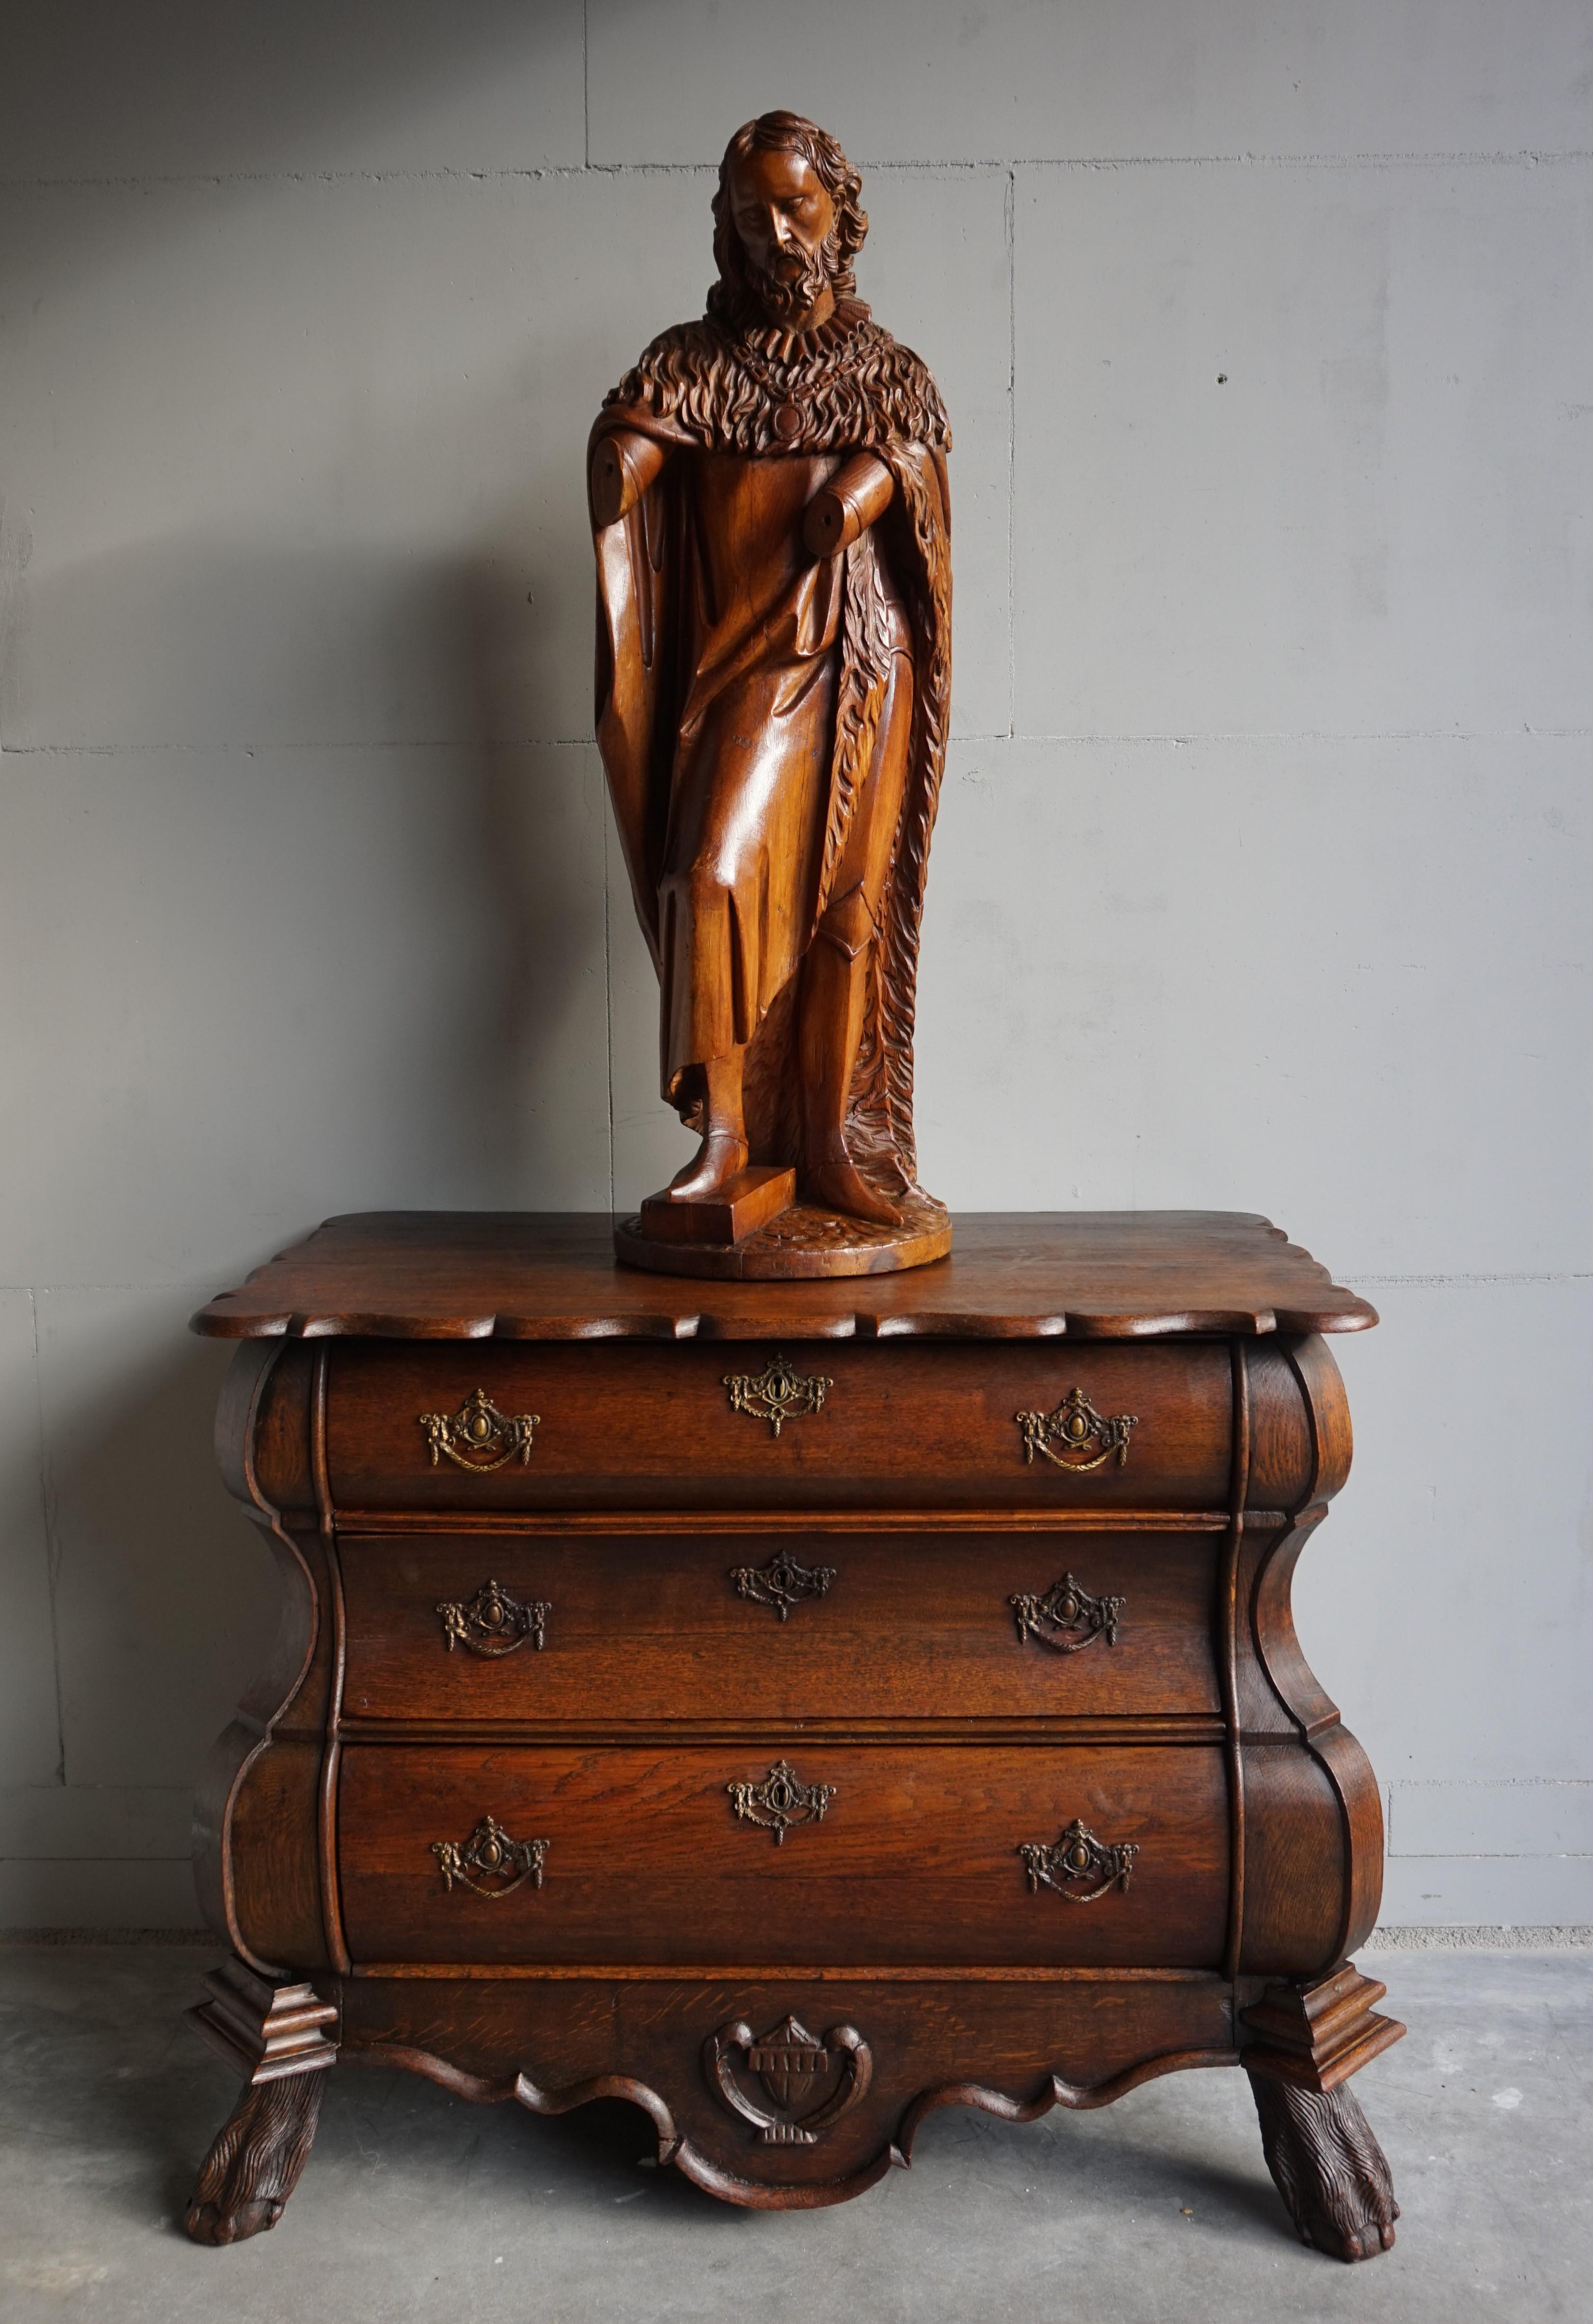 European Large Antique Wooden Sculpture of John the Baptist w. Stunning Hand Carved Face